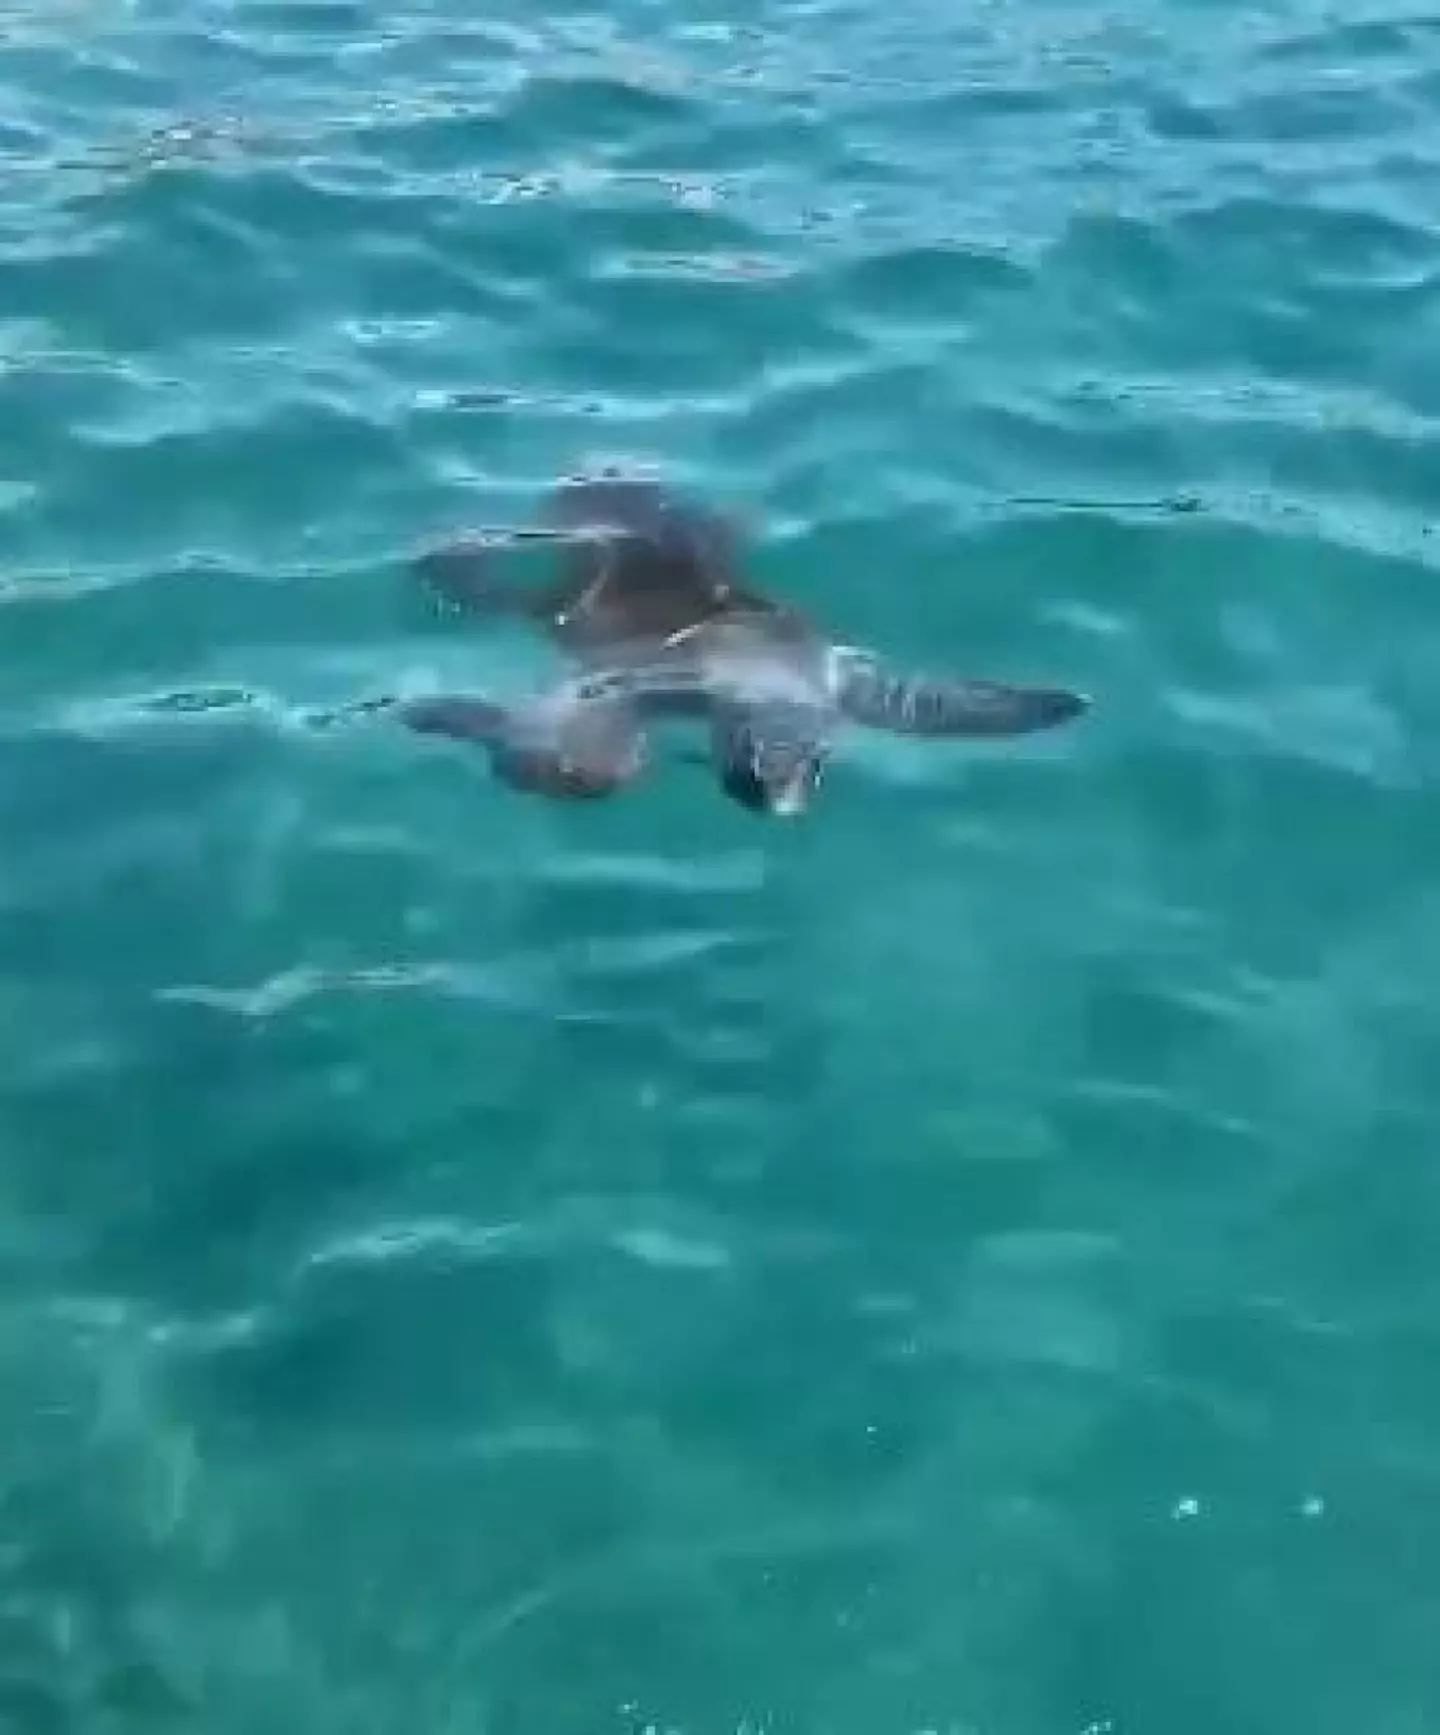 Sea turtles are rarely aggressive towards humans, but it's still important to be wary when you're in their territory.